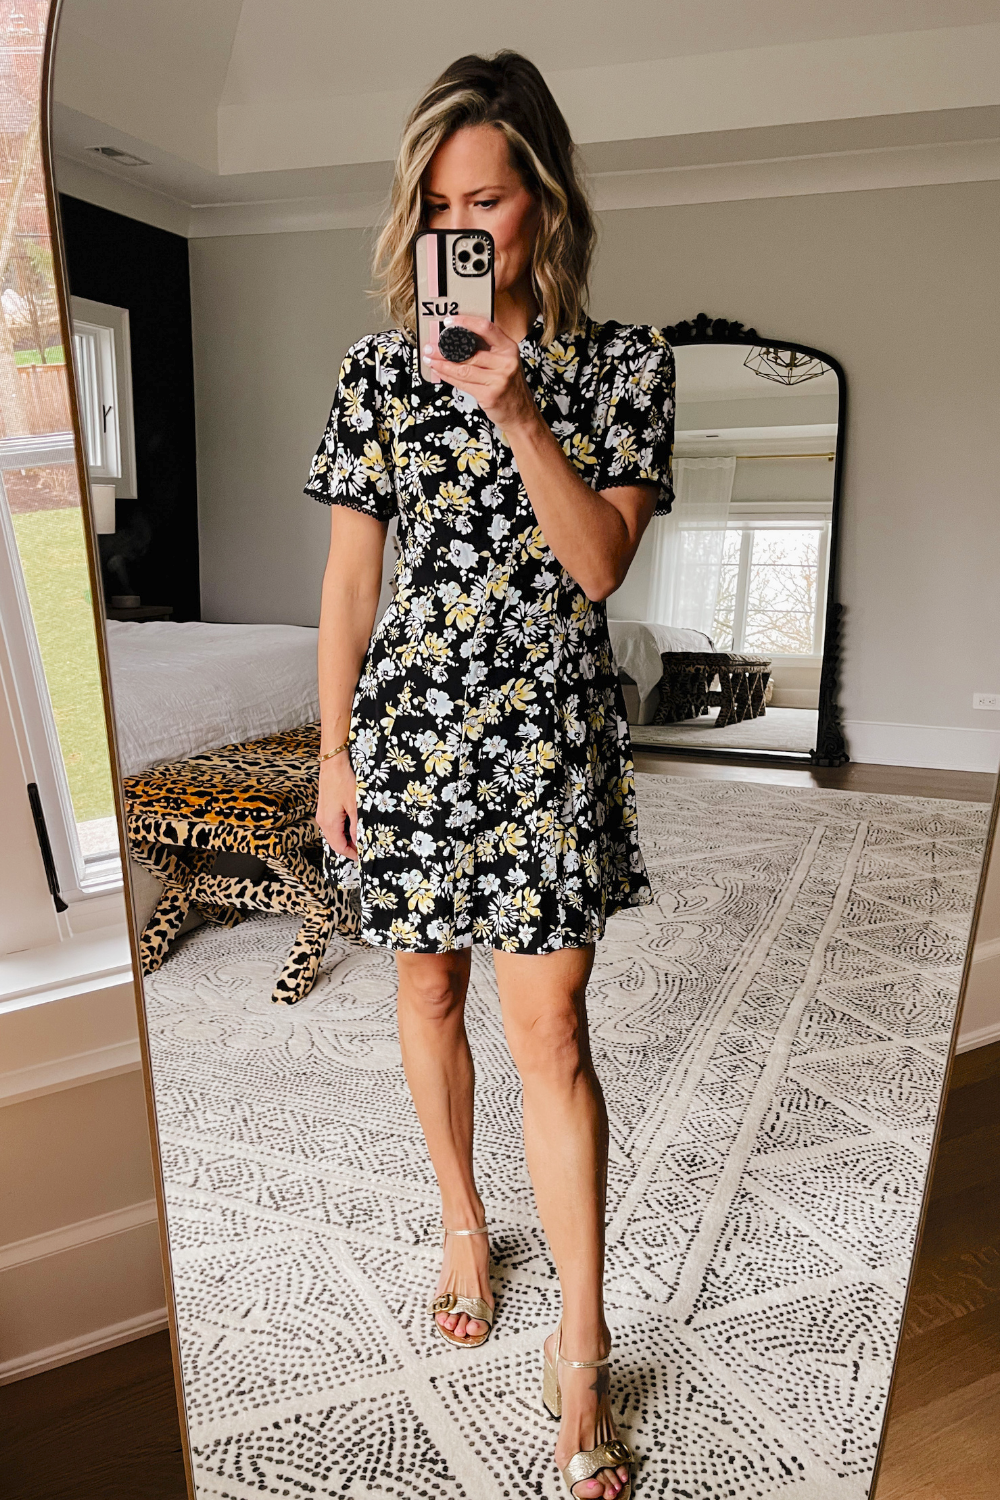 Suzanne taking a mirror selfie wearing a floral printed mini dress and Gucci heels.